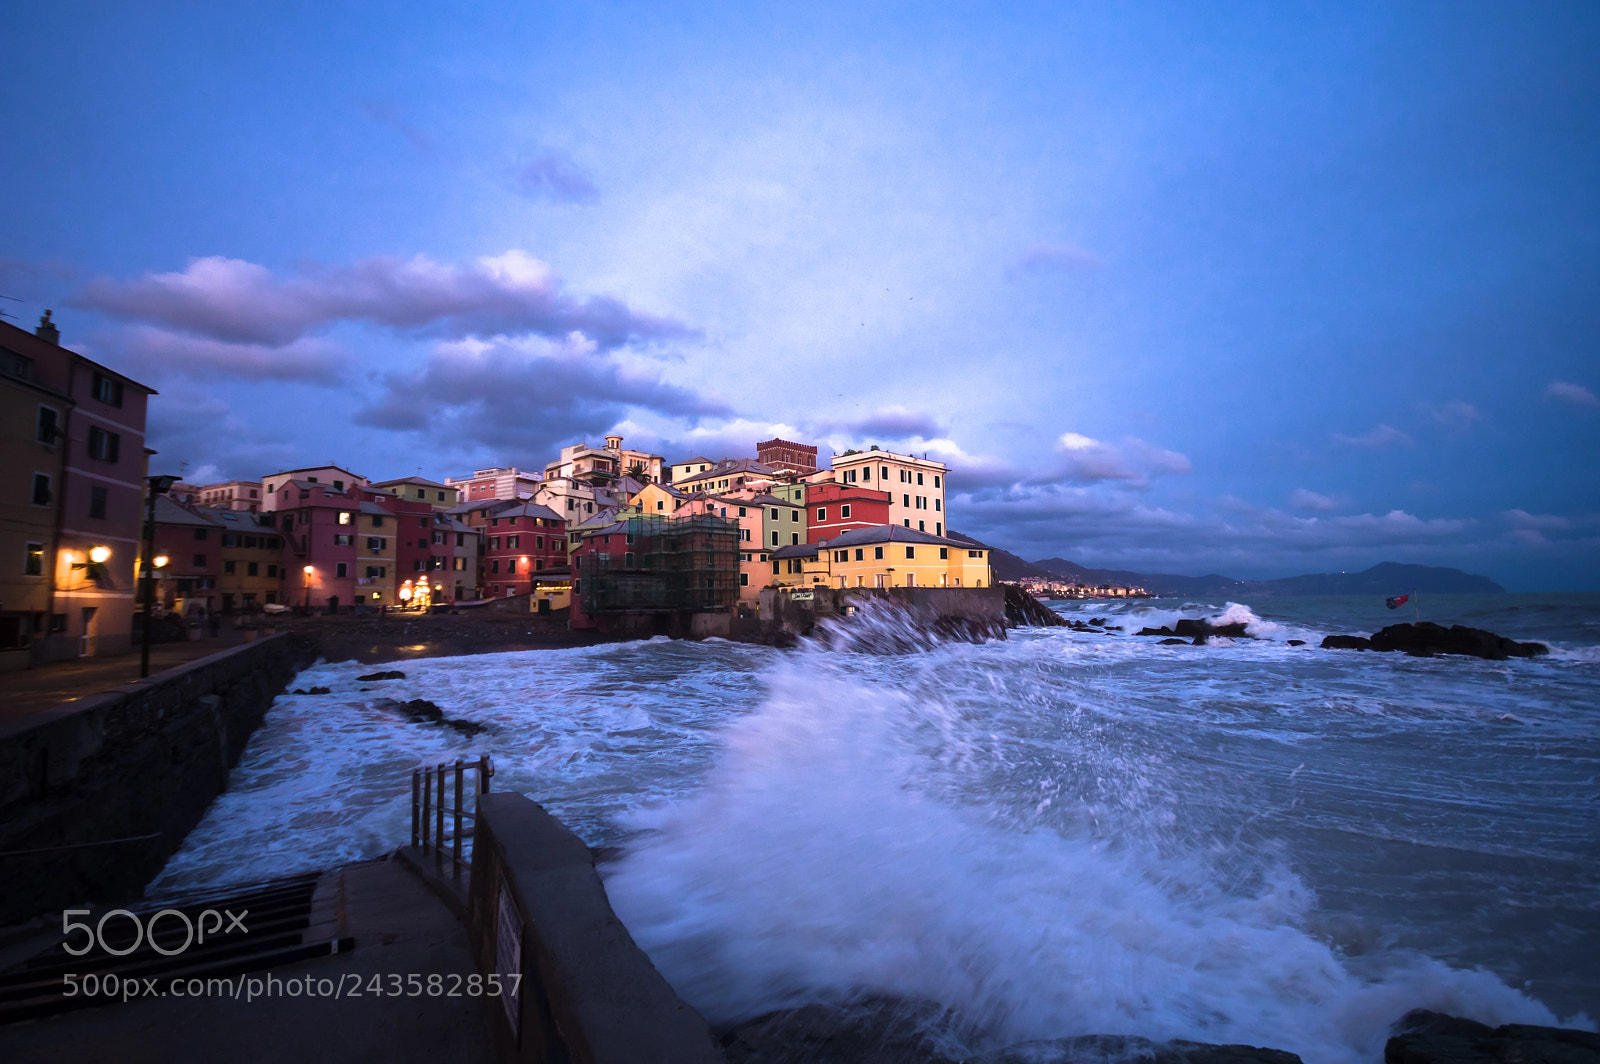 Pentax KP sample photo. Blue hour in boccadasse photography